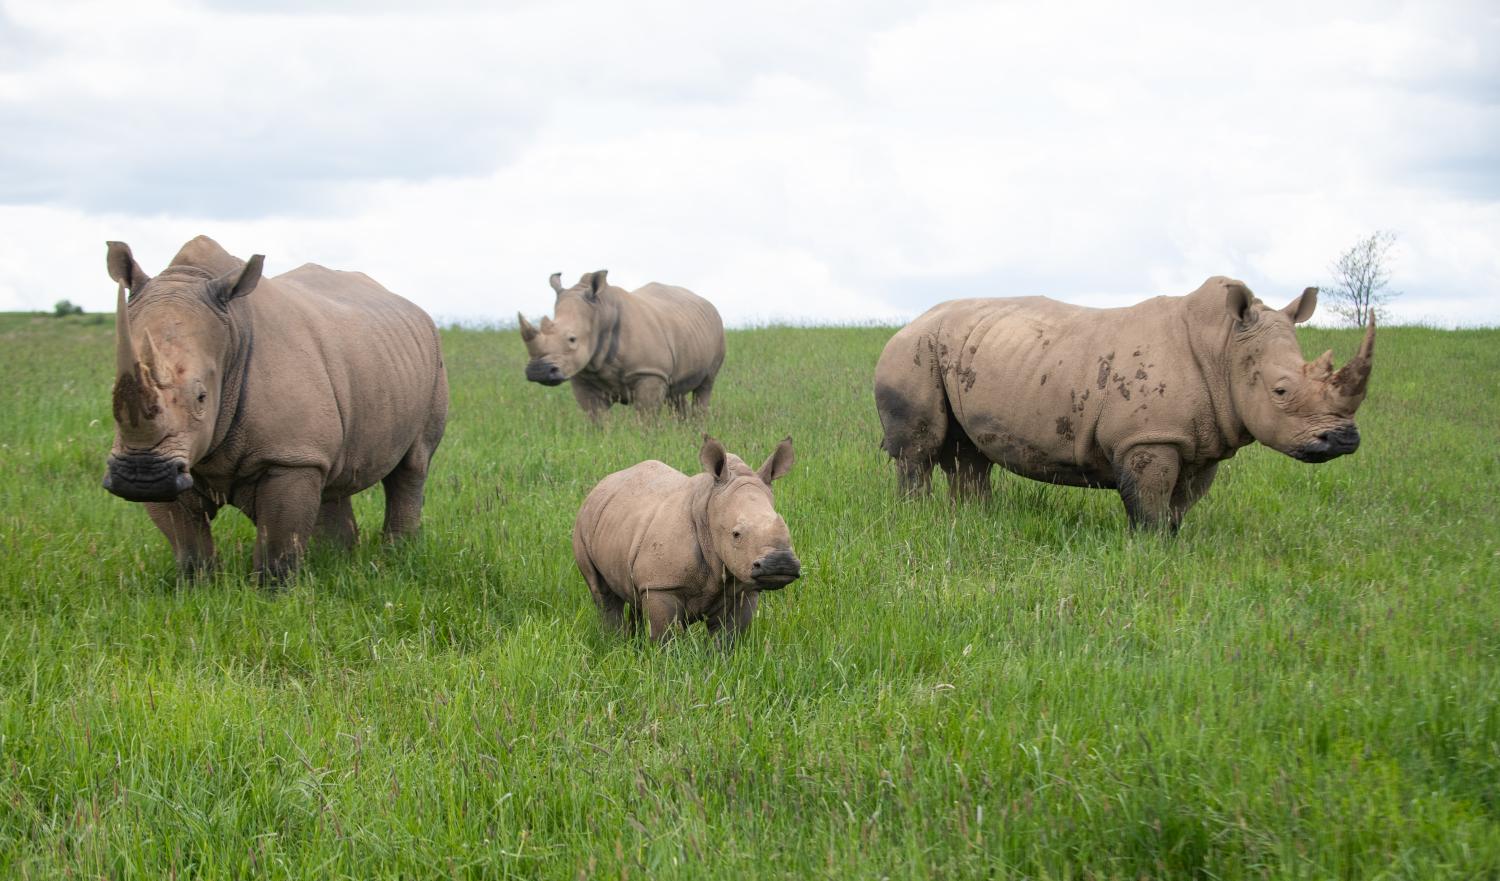 4 Southern White Rhinos standing in grass pasture